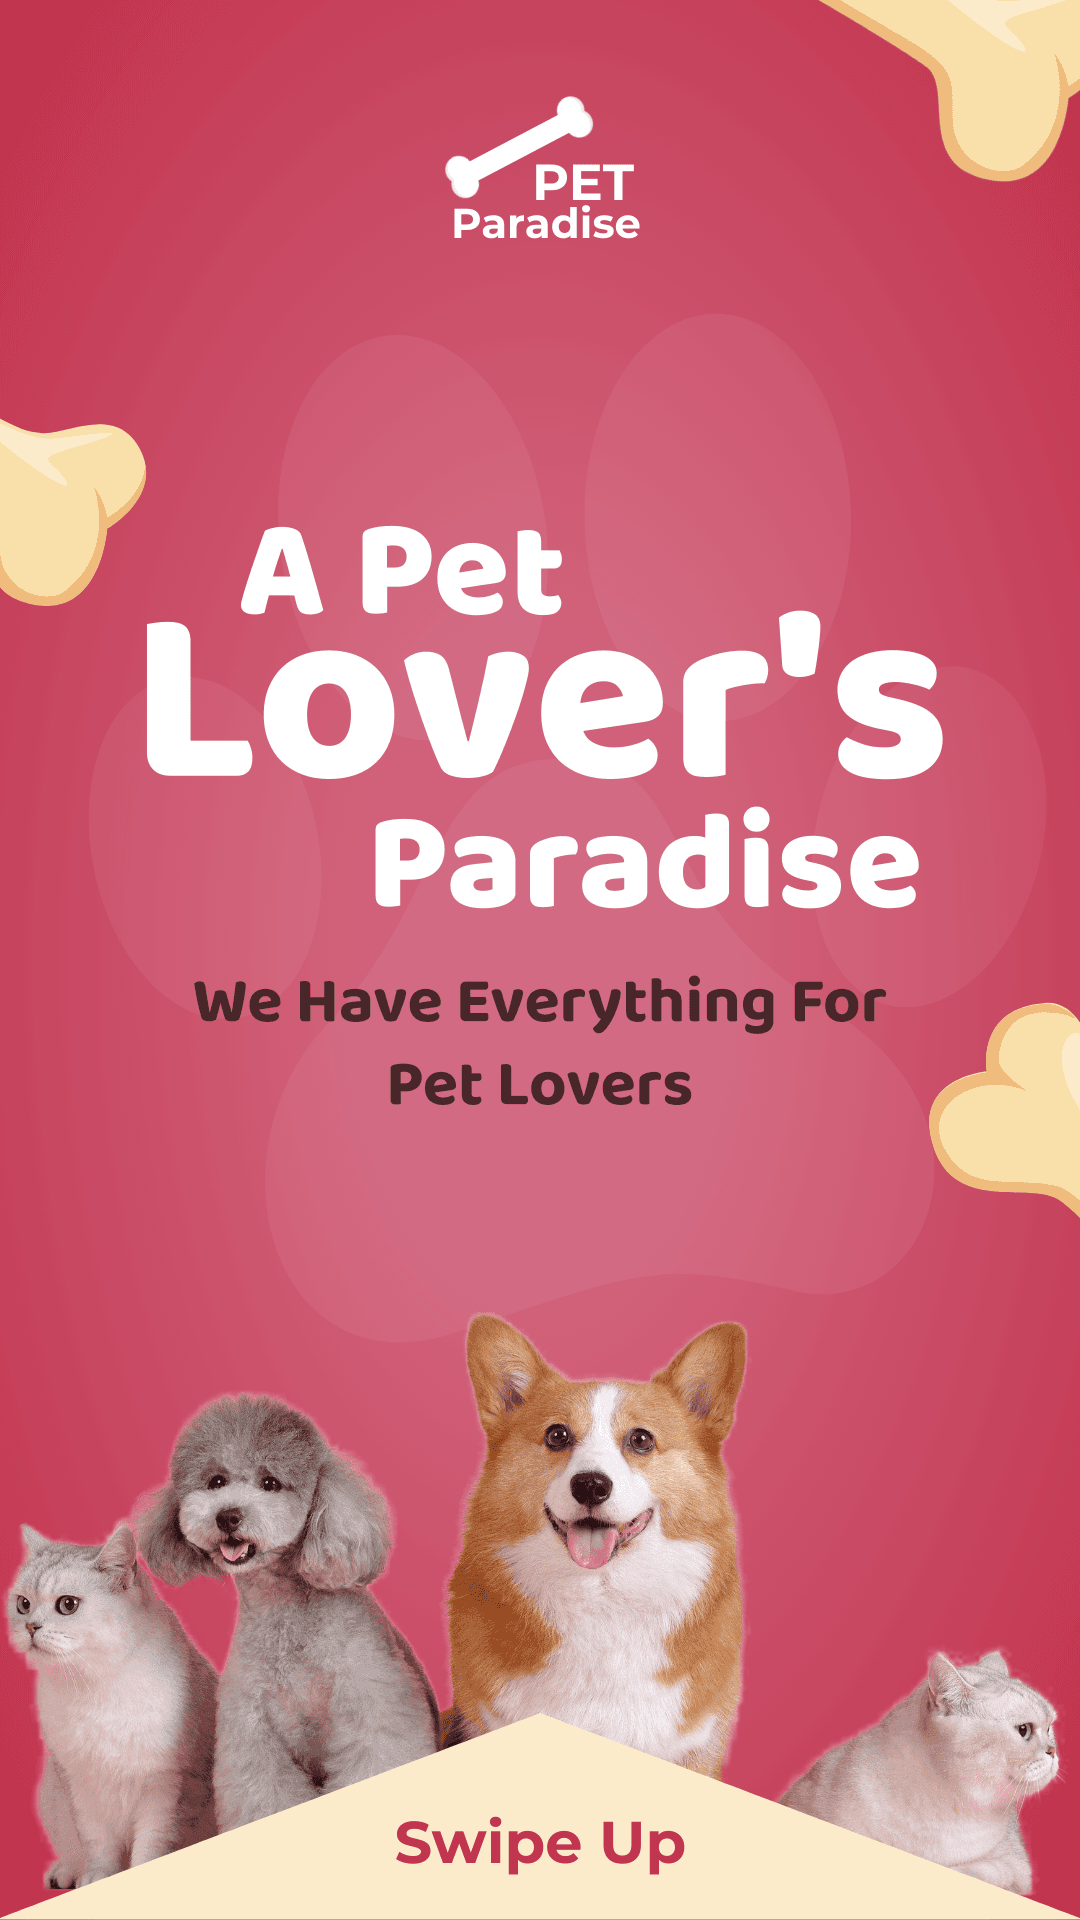 dogs-and-cats-pink-background-pet-paradise-whatsapp-story-template-thumbnail-img